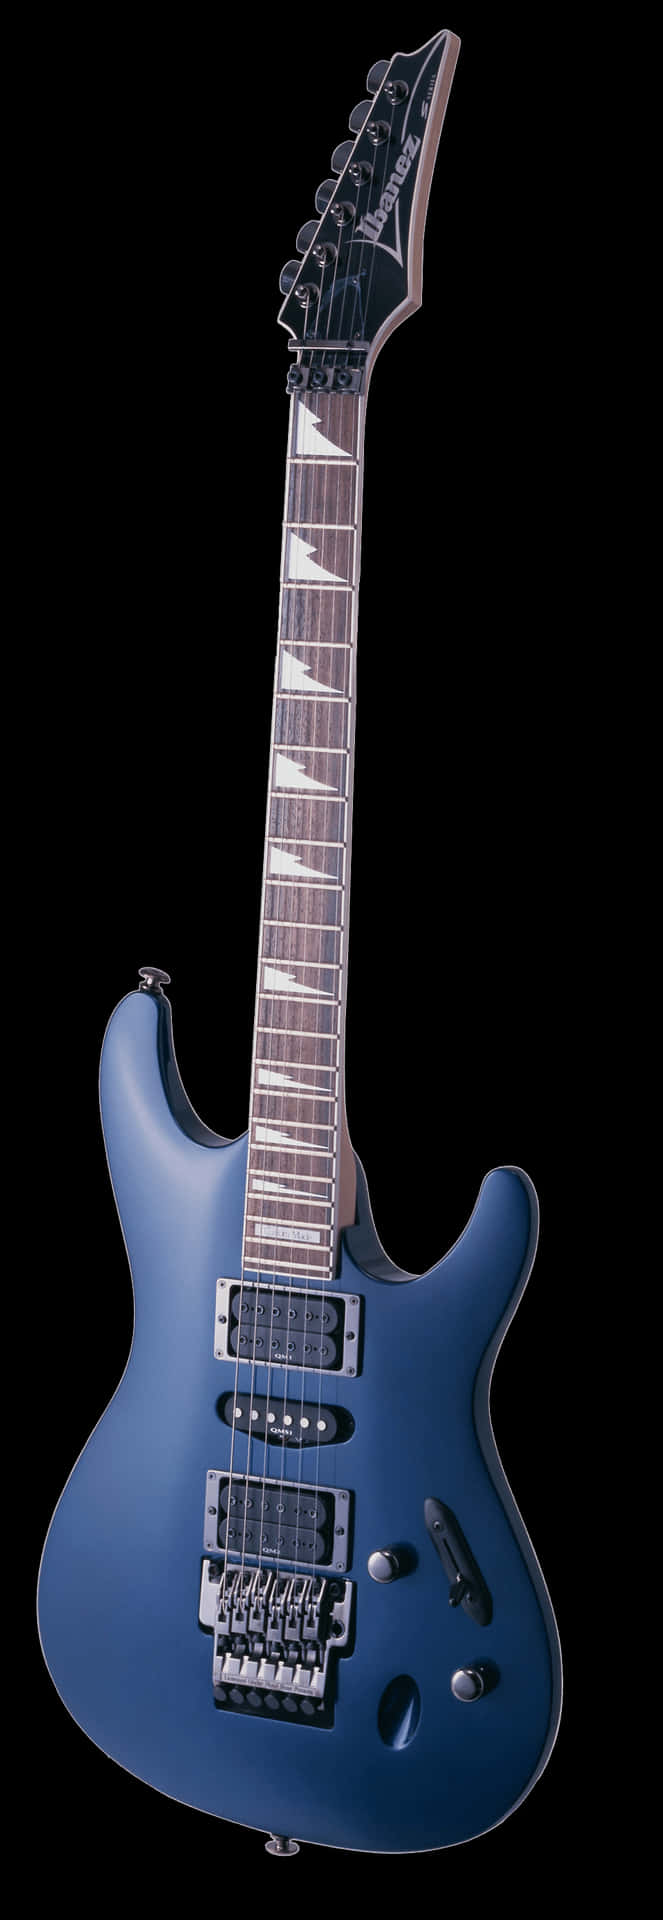 Blue Electric Guitar Isolated PNG image